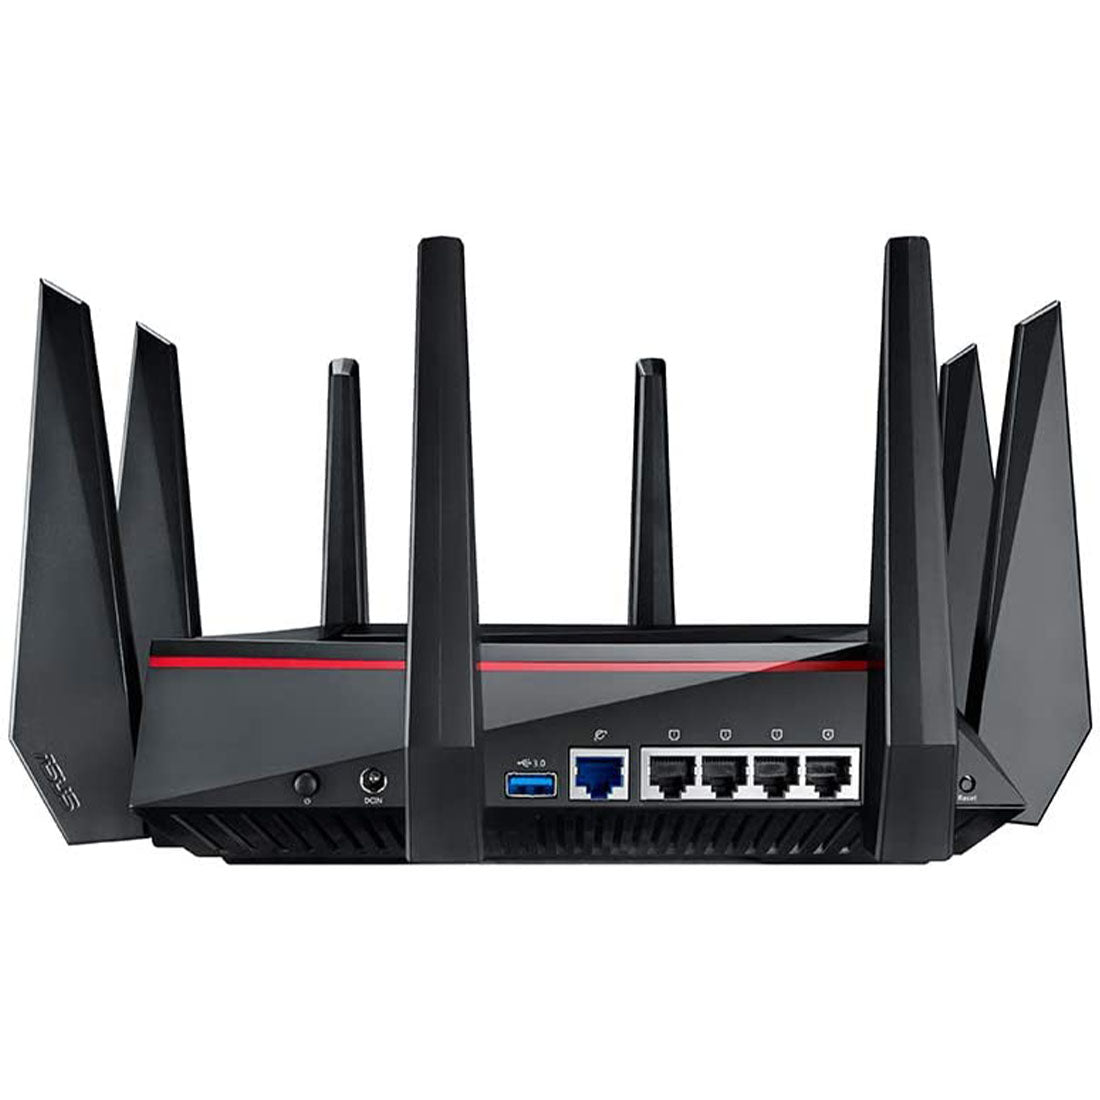 ASUS RT-AC5300 Tri-Band Gigabit WiFi Gaming Router with MU-MIMO, AiProtection and AiMesh